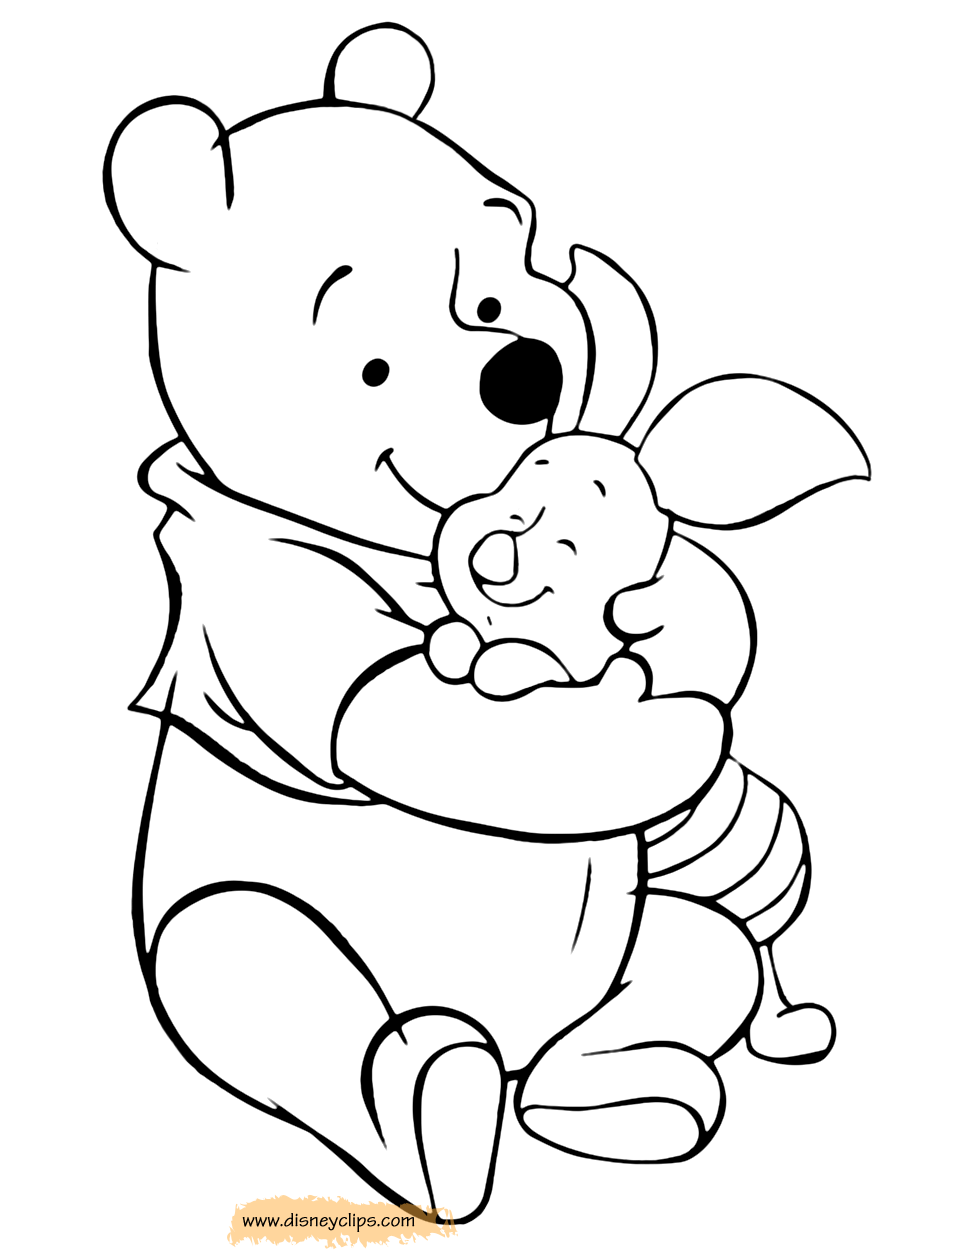 Winnie the Pooh & Friends Coloring Pages 4 | Disneyclips.com